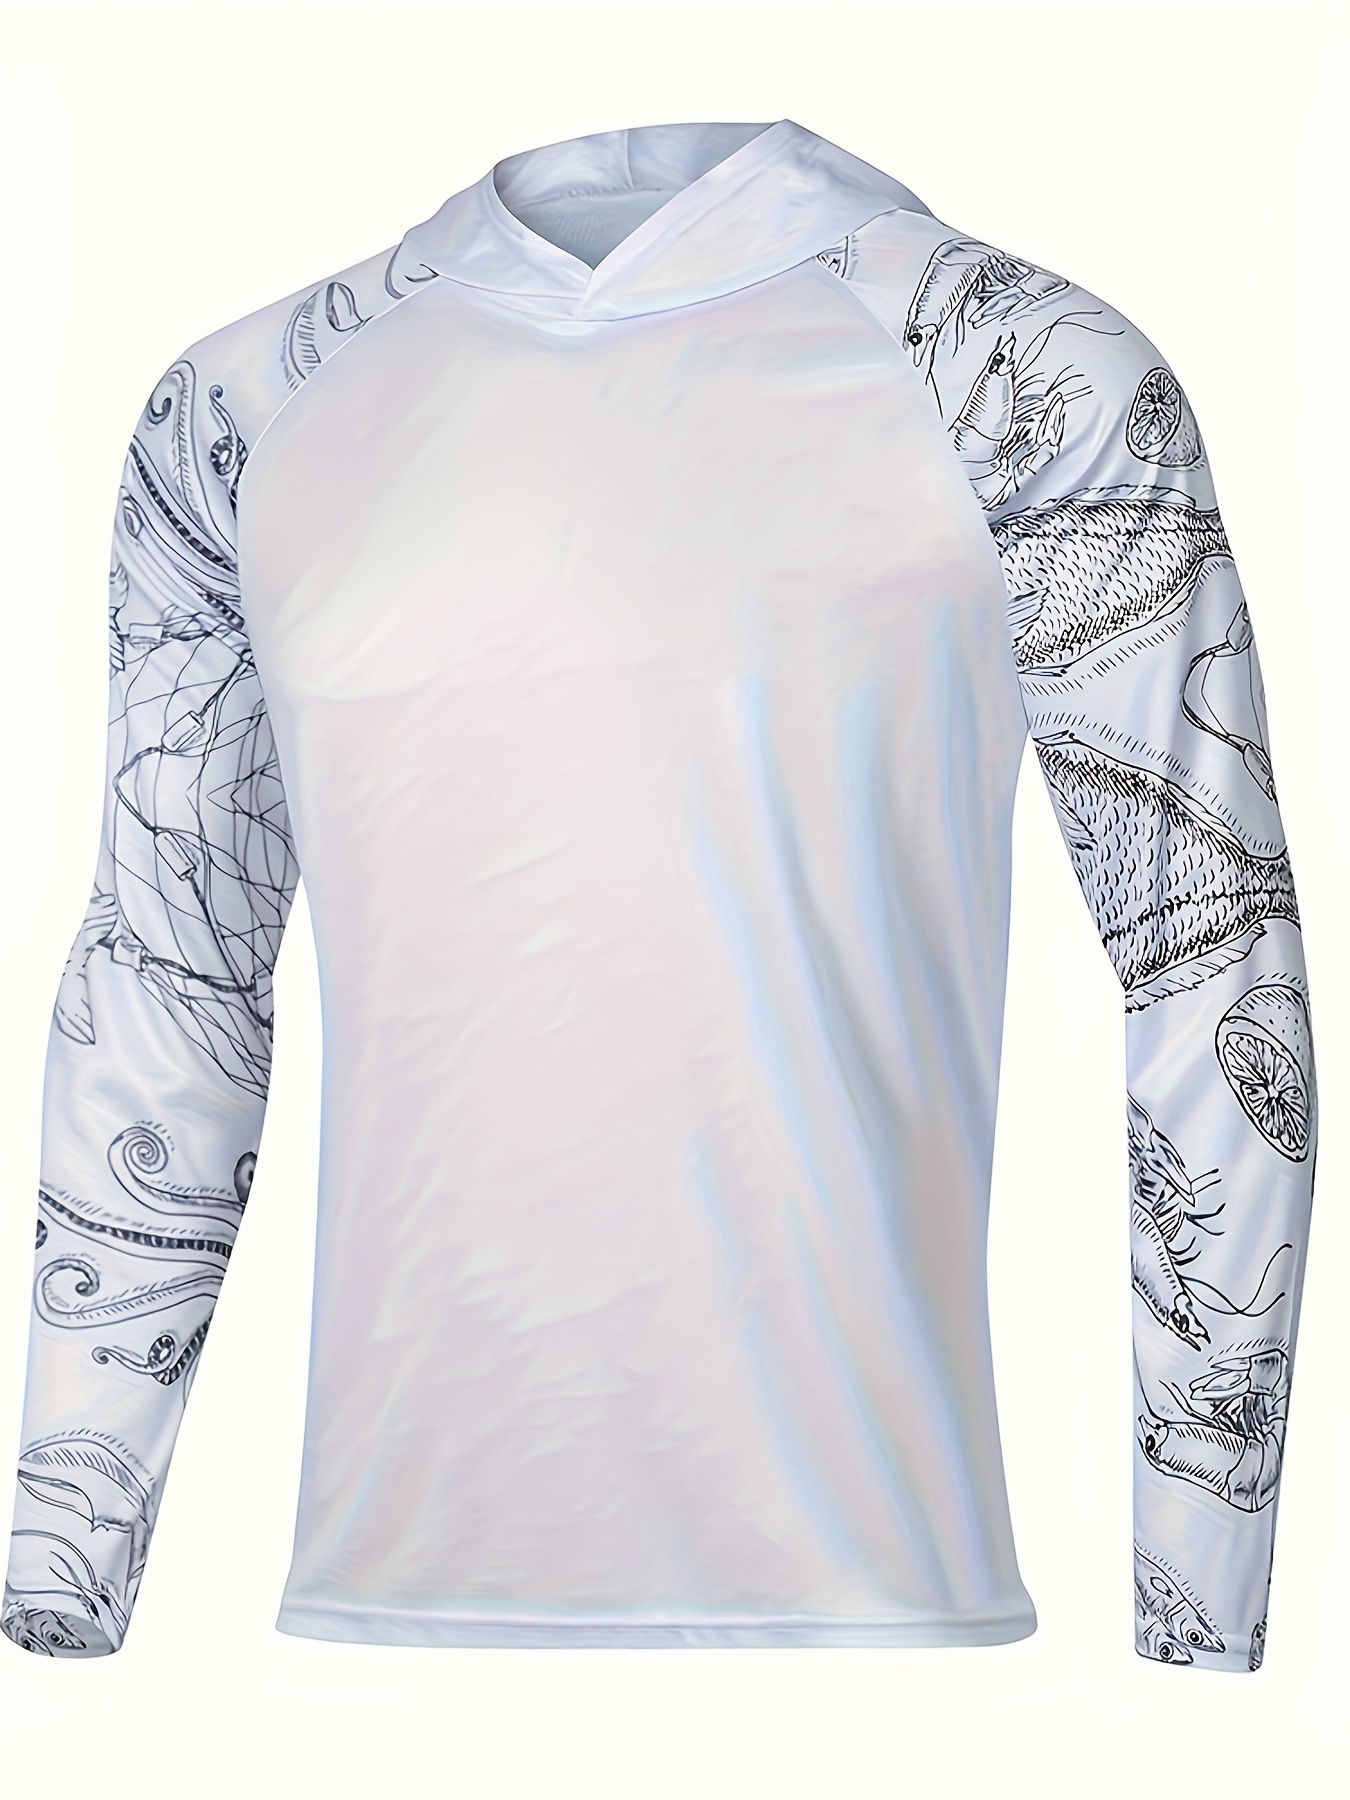 Men's Raglan Sleeve With Fish Pattern Hoodie, Anti-UV Sunscreen Sun Protection Fishing Shirt Breathable Quick Dry Hooded Fishing Jersey For